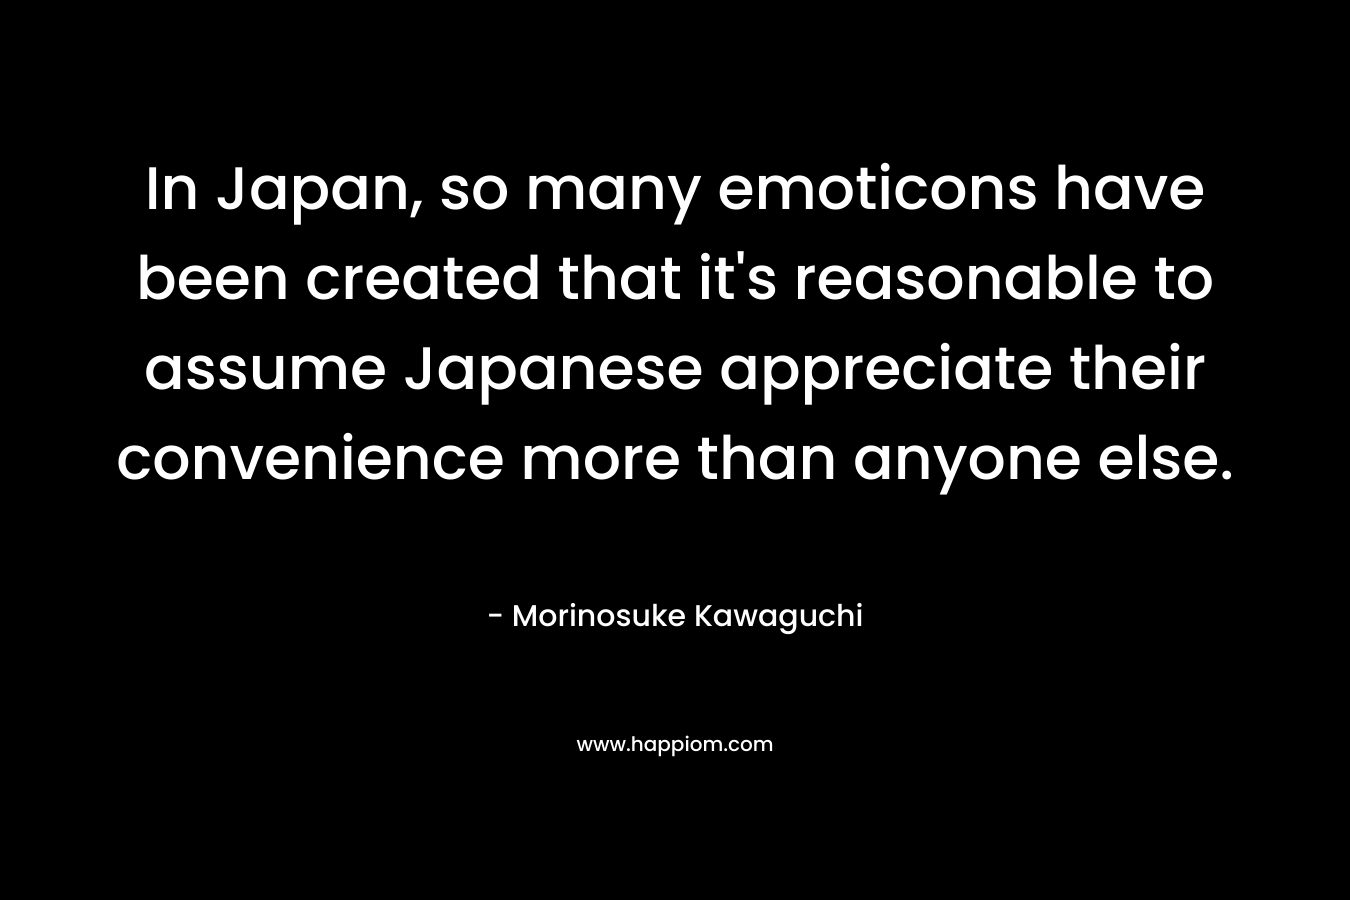 In Japan, so many emoticons have been created that it's reasonable to assume Japanese appreciate their convenience more than anyone else.